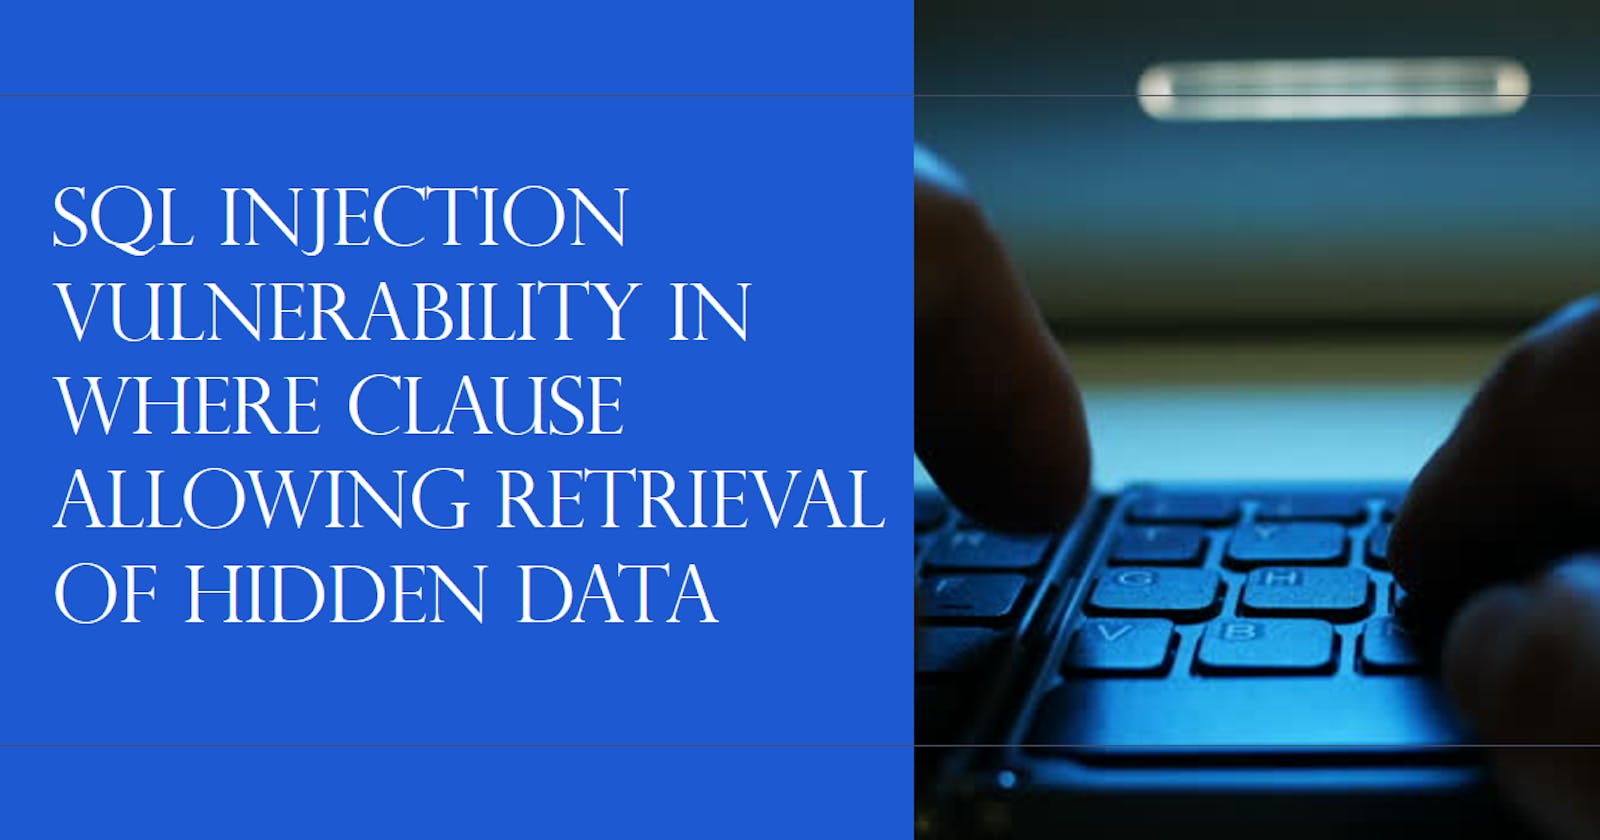 Lab: SQL injection vulnerability in WHERE clause allowing retrieval of hidden data